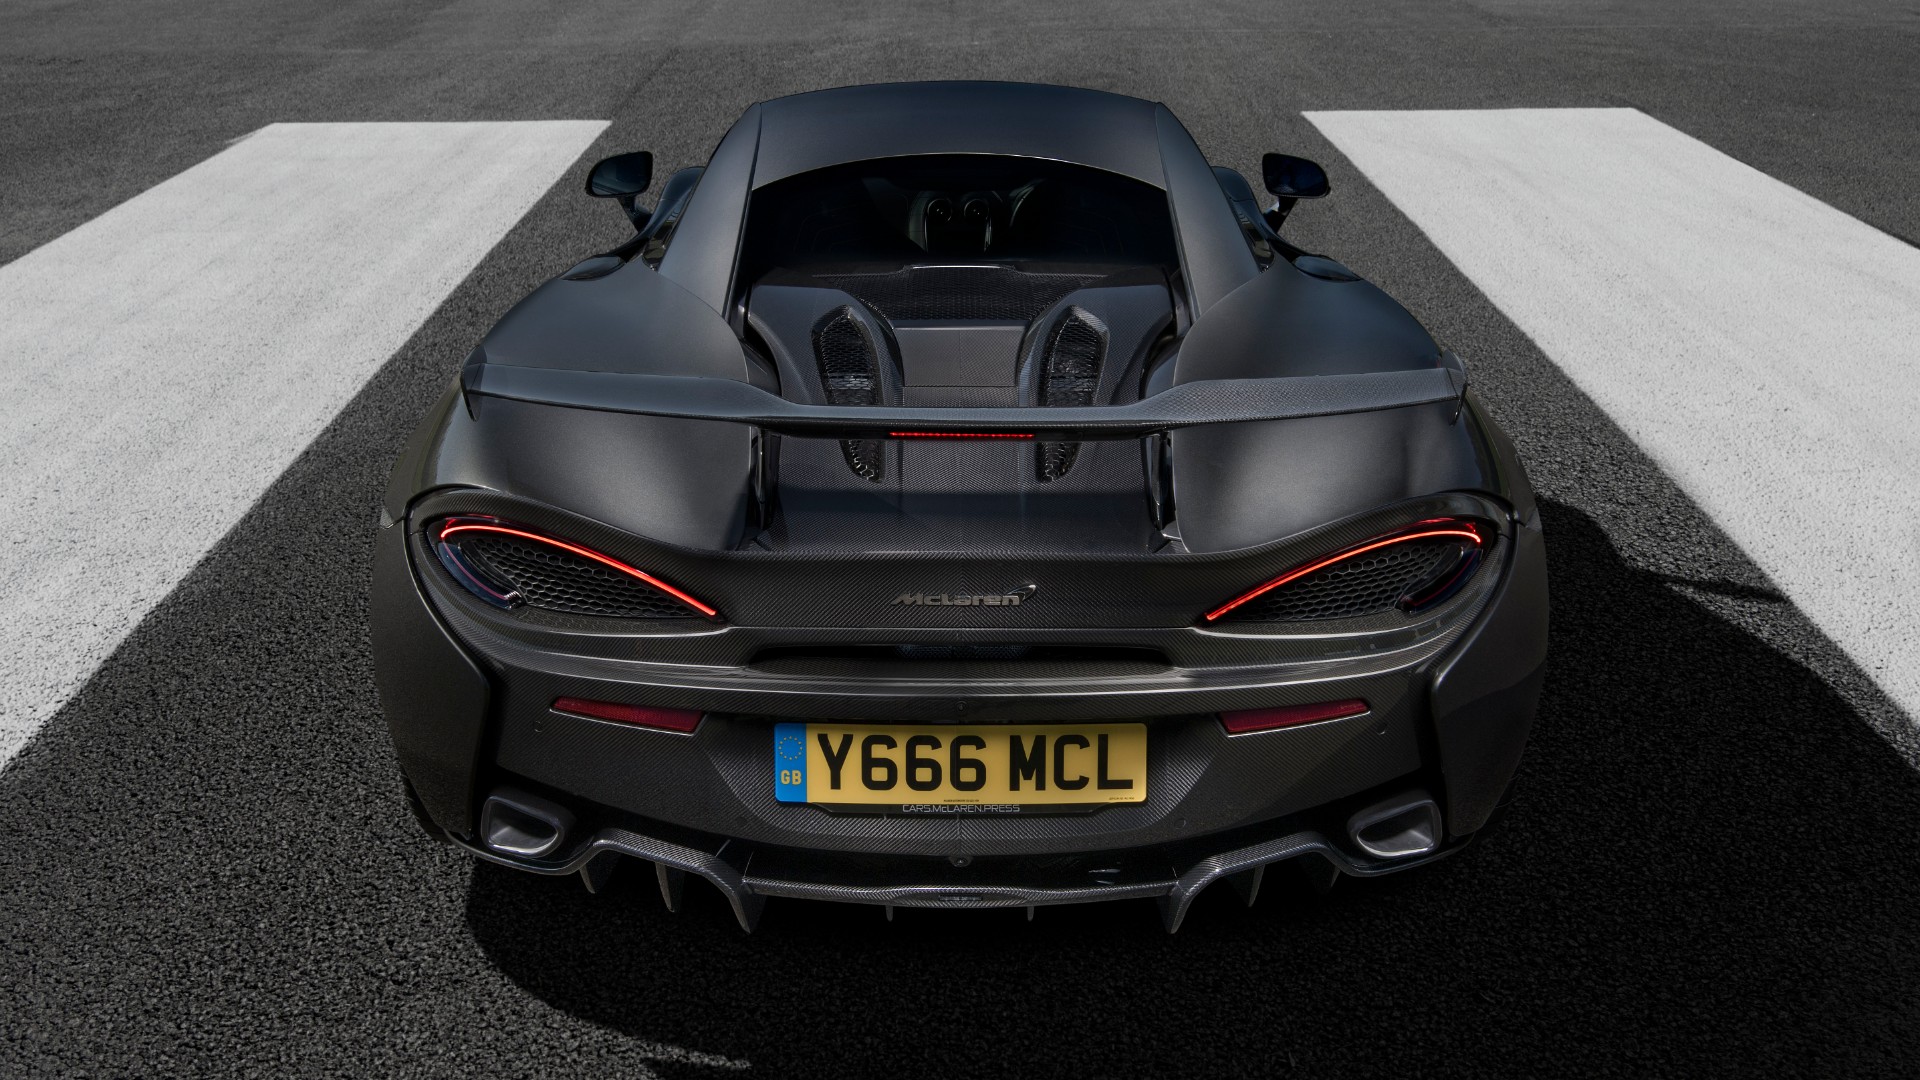 MSO Defined High Downforce Kit for McLaren 570